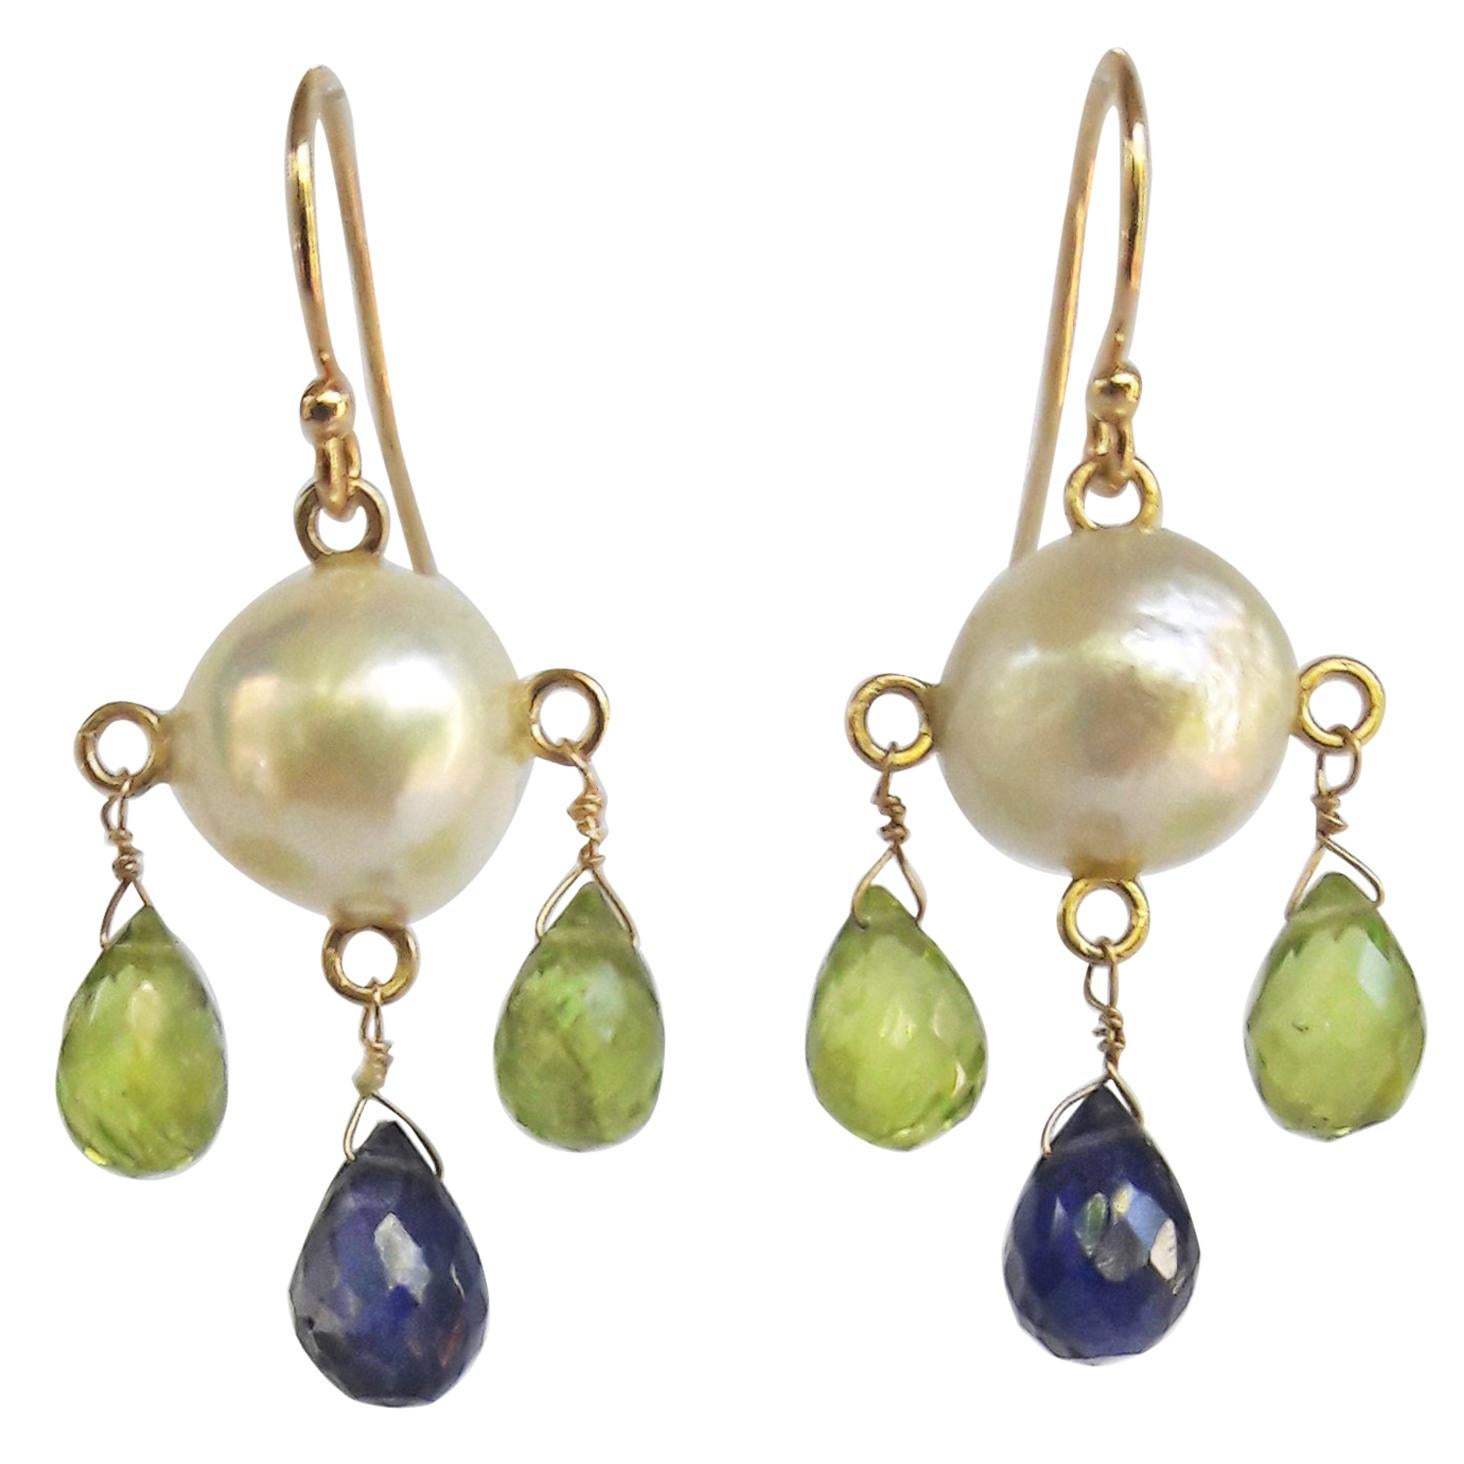 Marina J White Pearl Earrings with Iolite and Peridot Brioletts  and 14 K Gold 